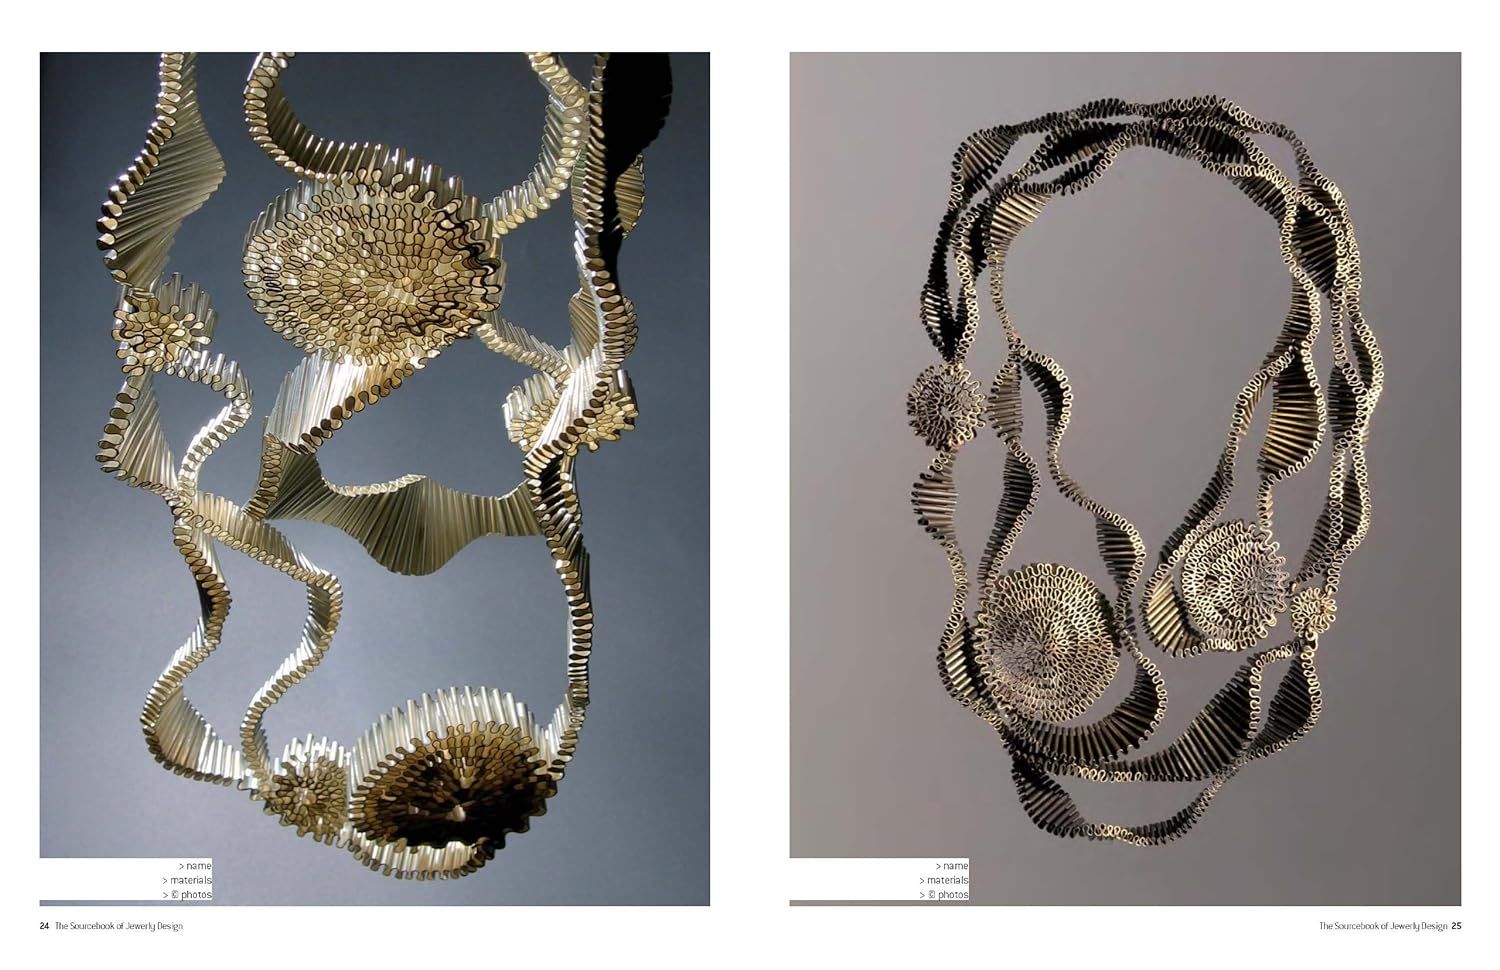  The Sourcebook of Contemporary Jewelry Design 